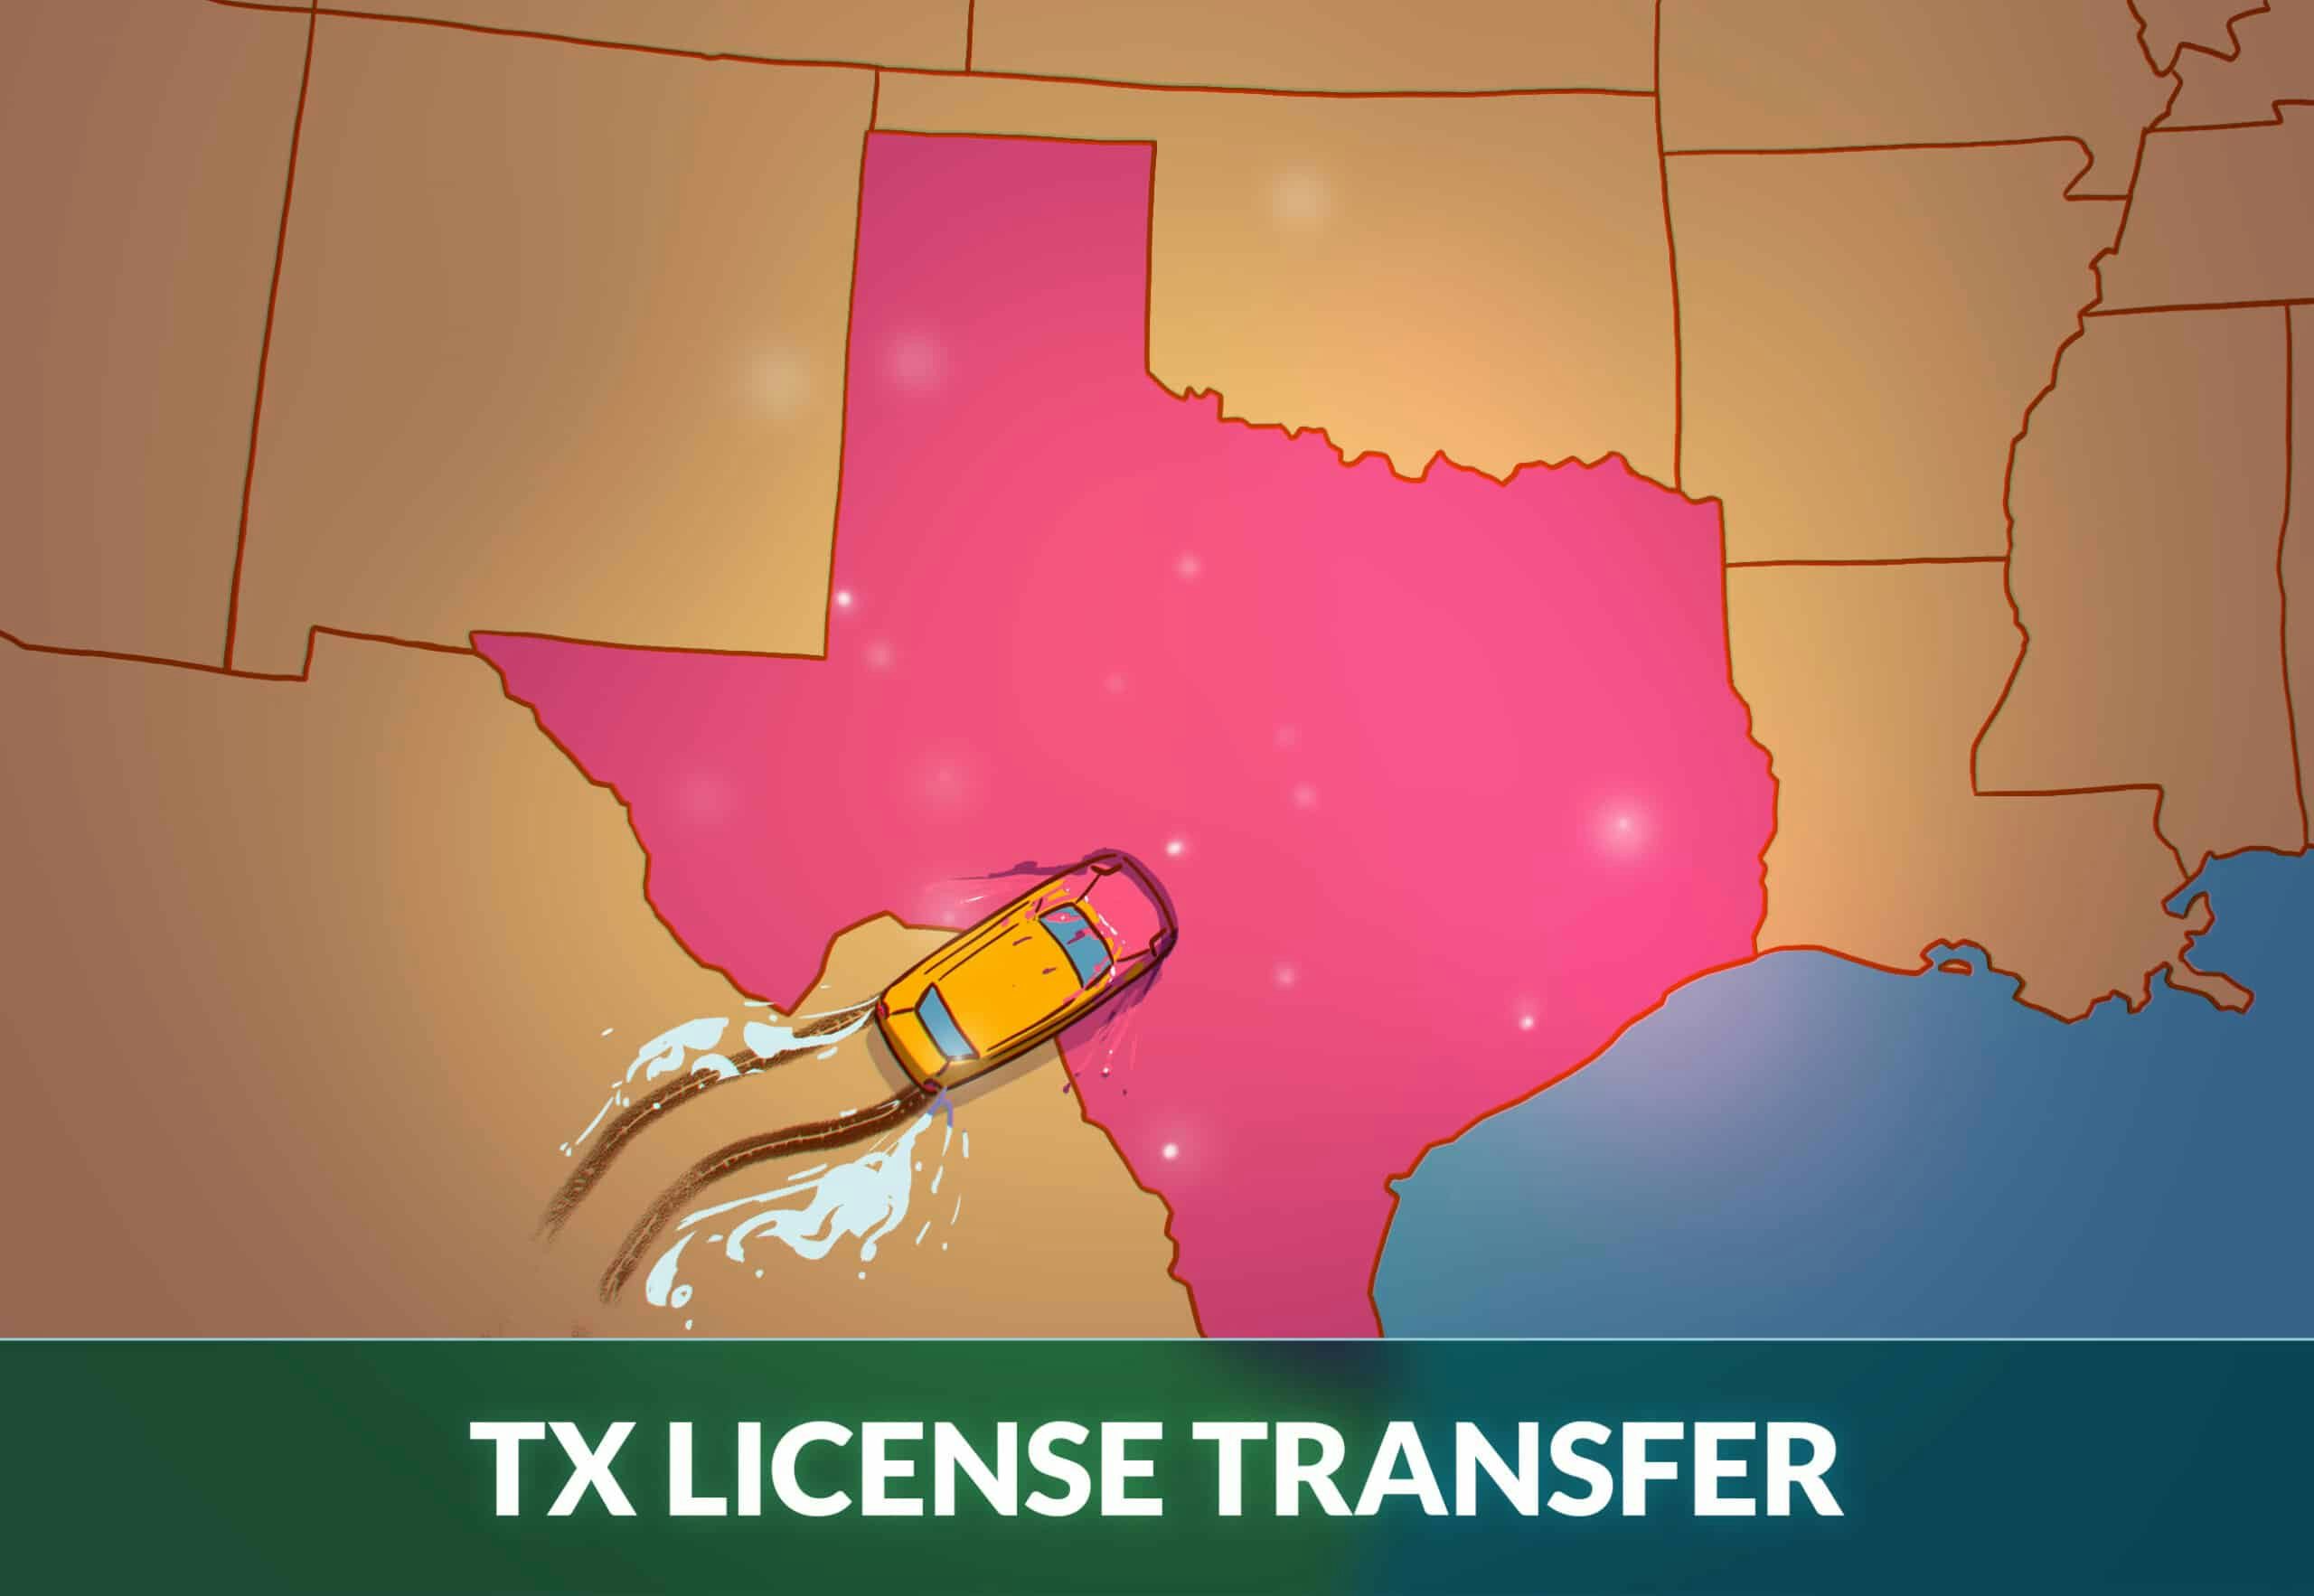 how to get texas dps audit number without license